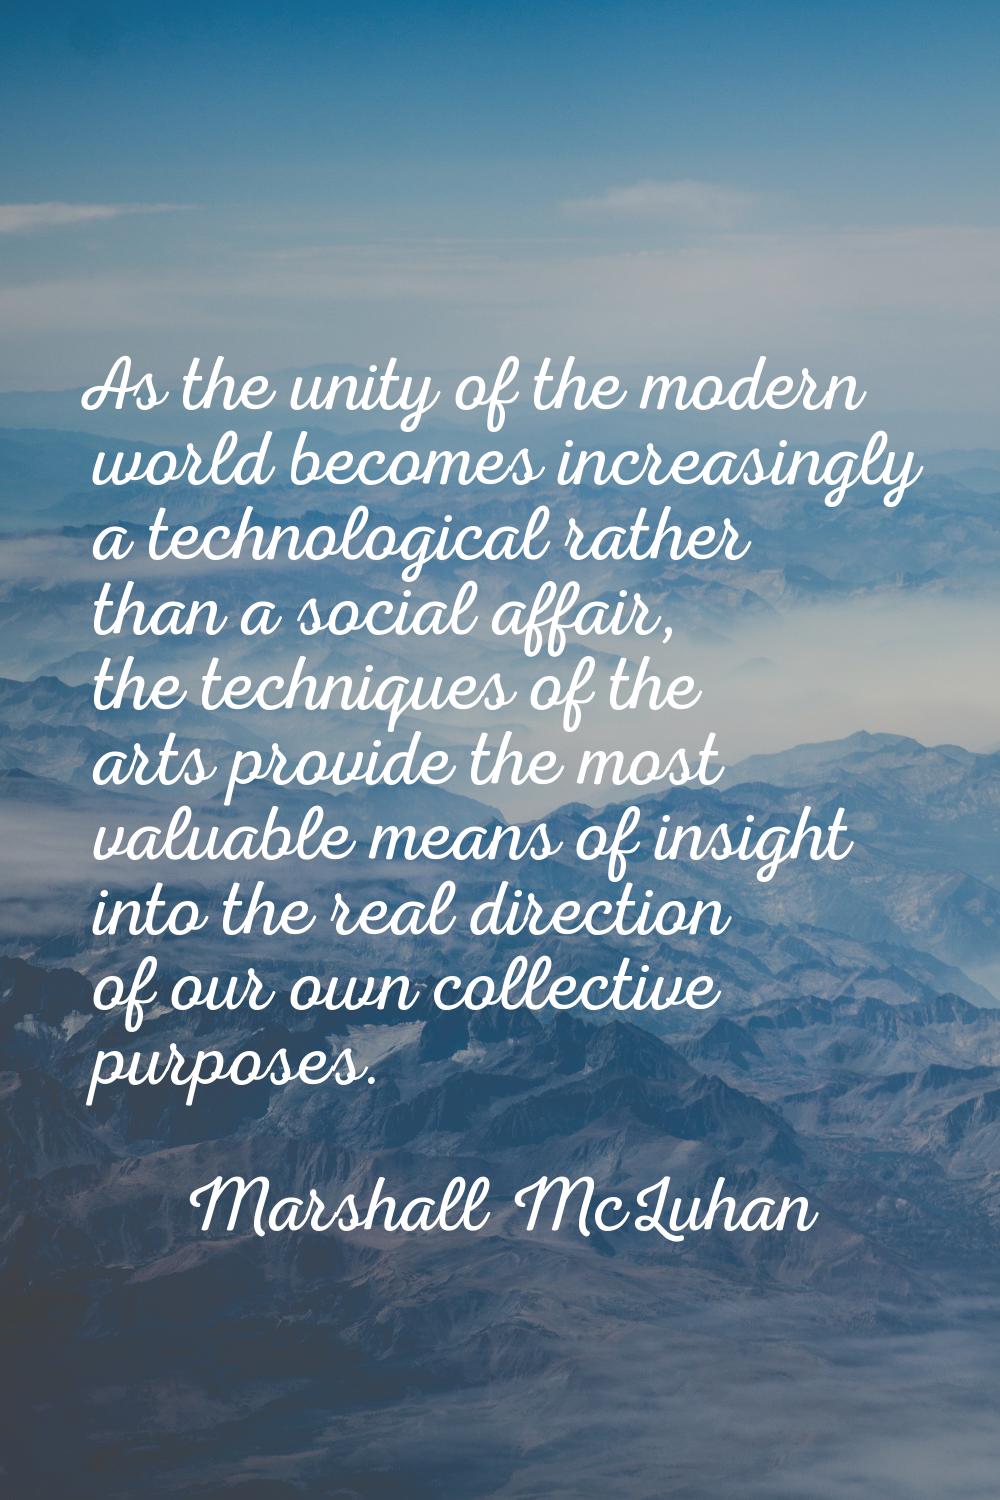 As the unity of the modern world becomes increasingly a technological rather than a social affair, 